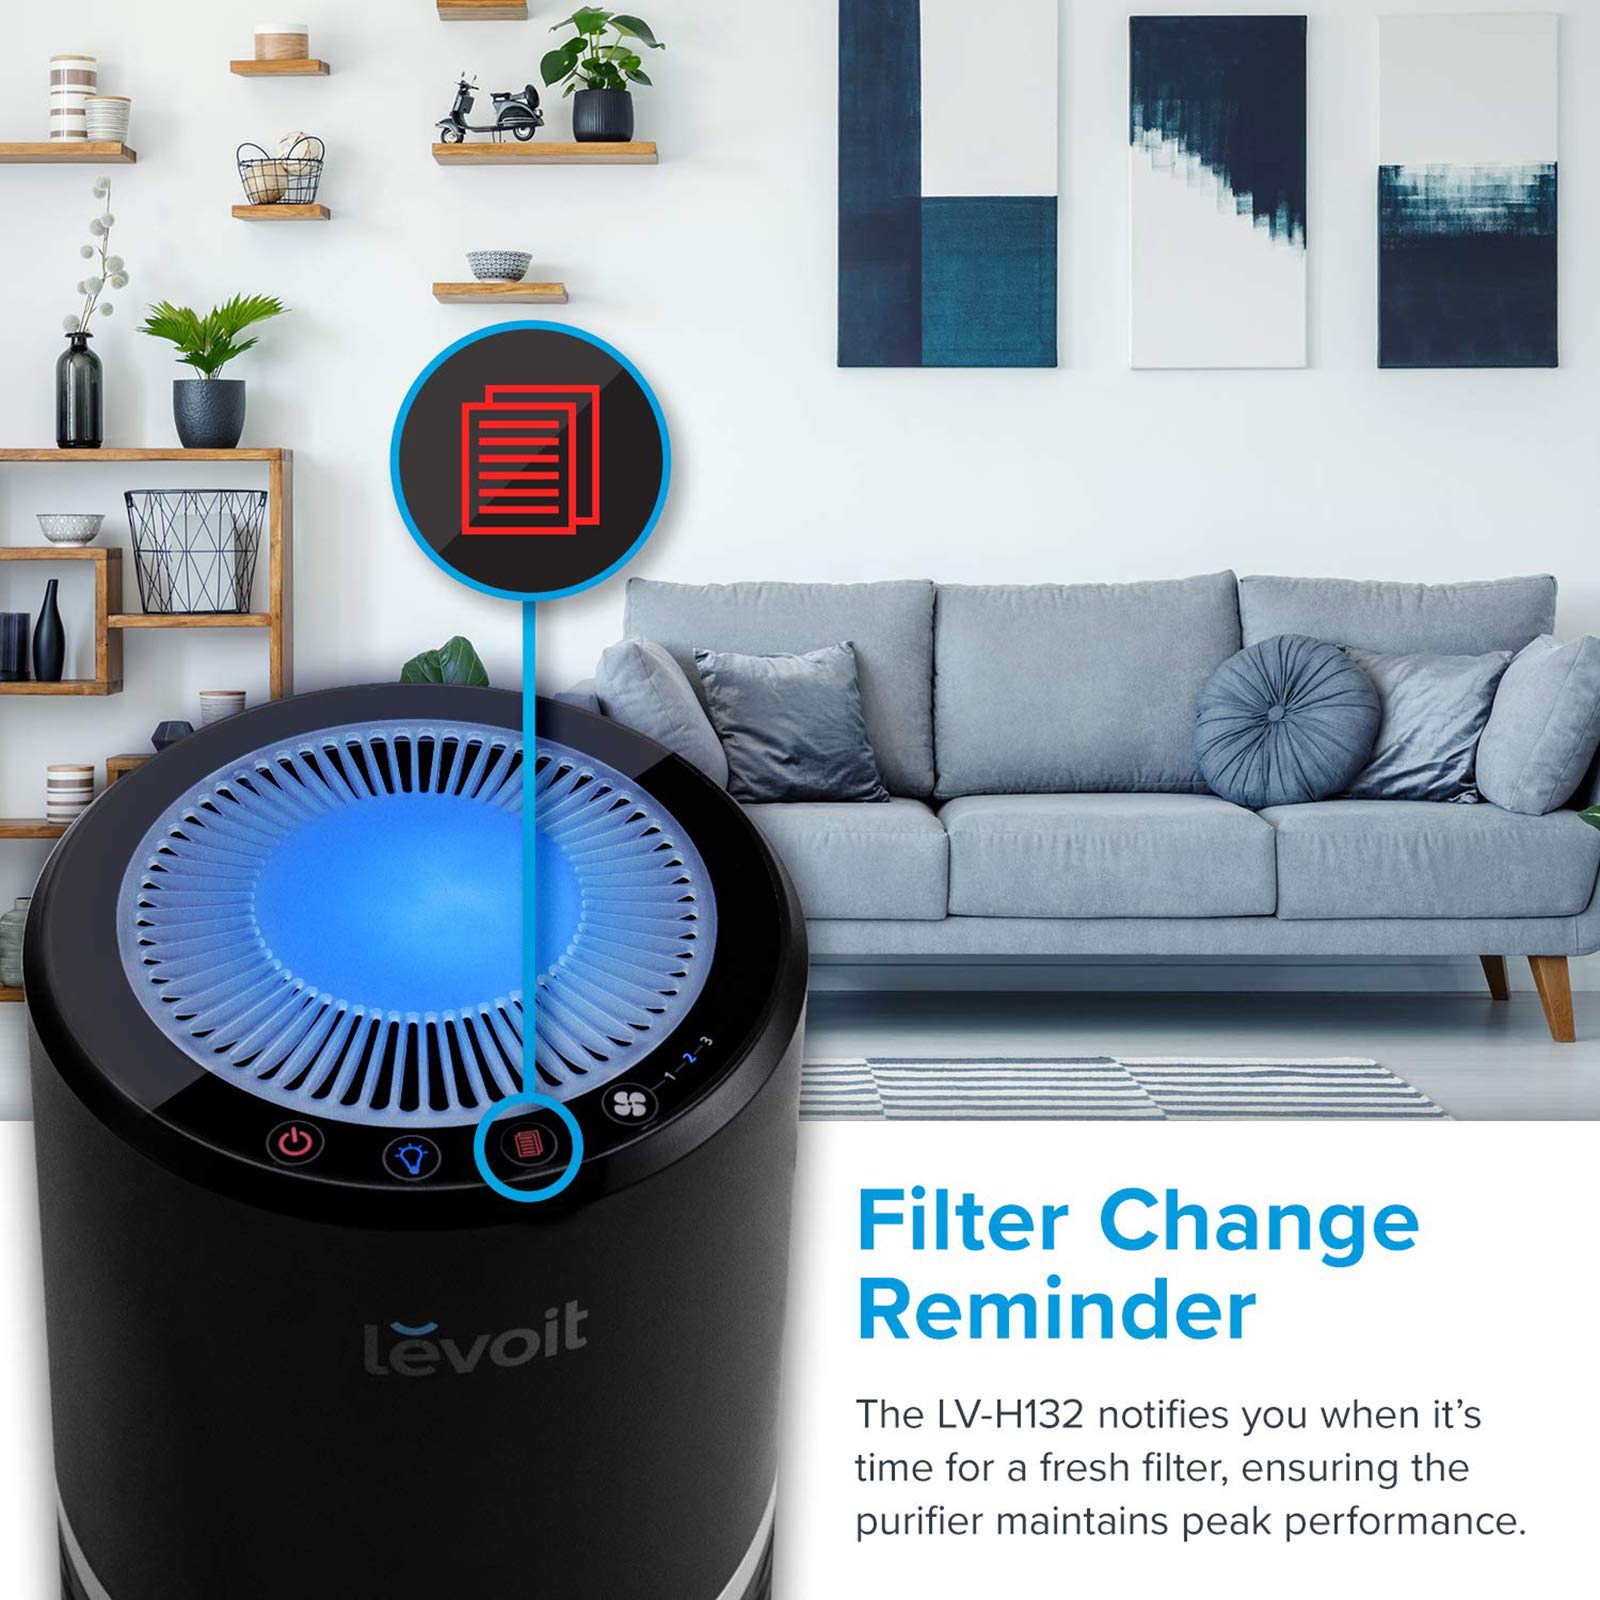 Levoit Air Purifier For Home With True Hepa Filter, Filter Change Reminder, Led Display Off Function, Portable Purifiers For Dust, Smokers, Pollen, Pet Dander, Hay Fever, Cooking Smell, Lv-H132 Black